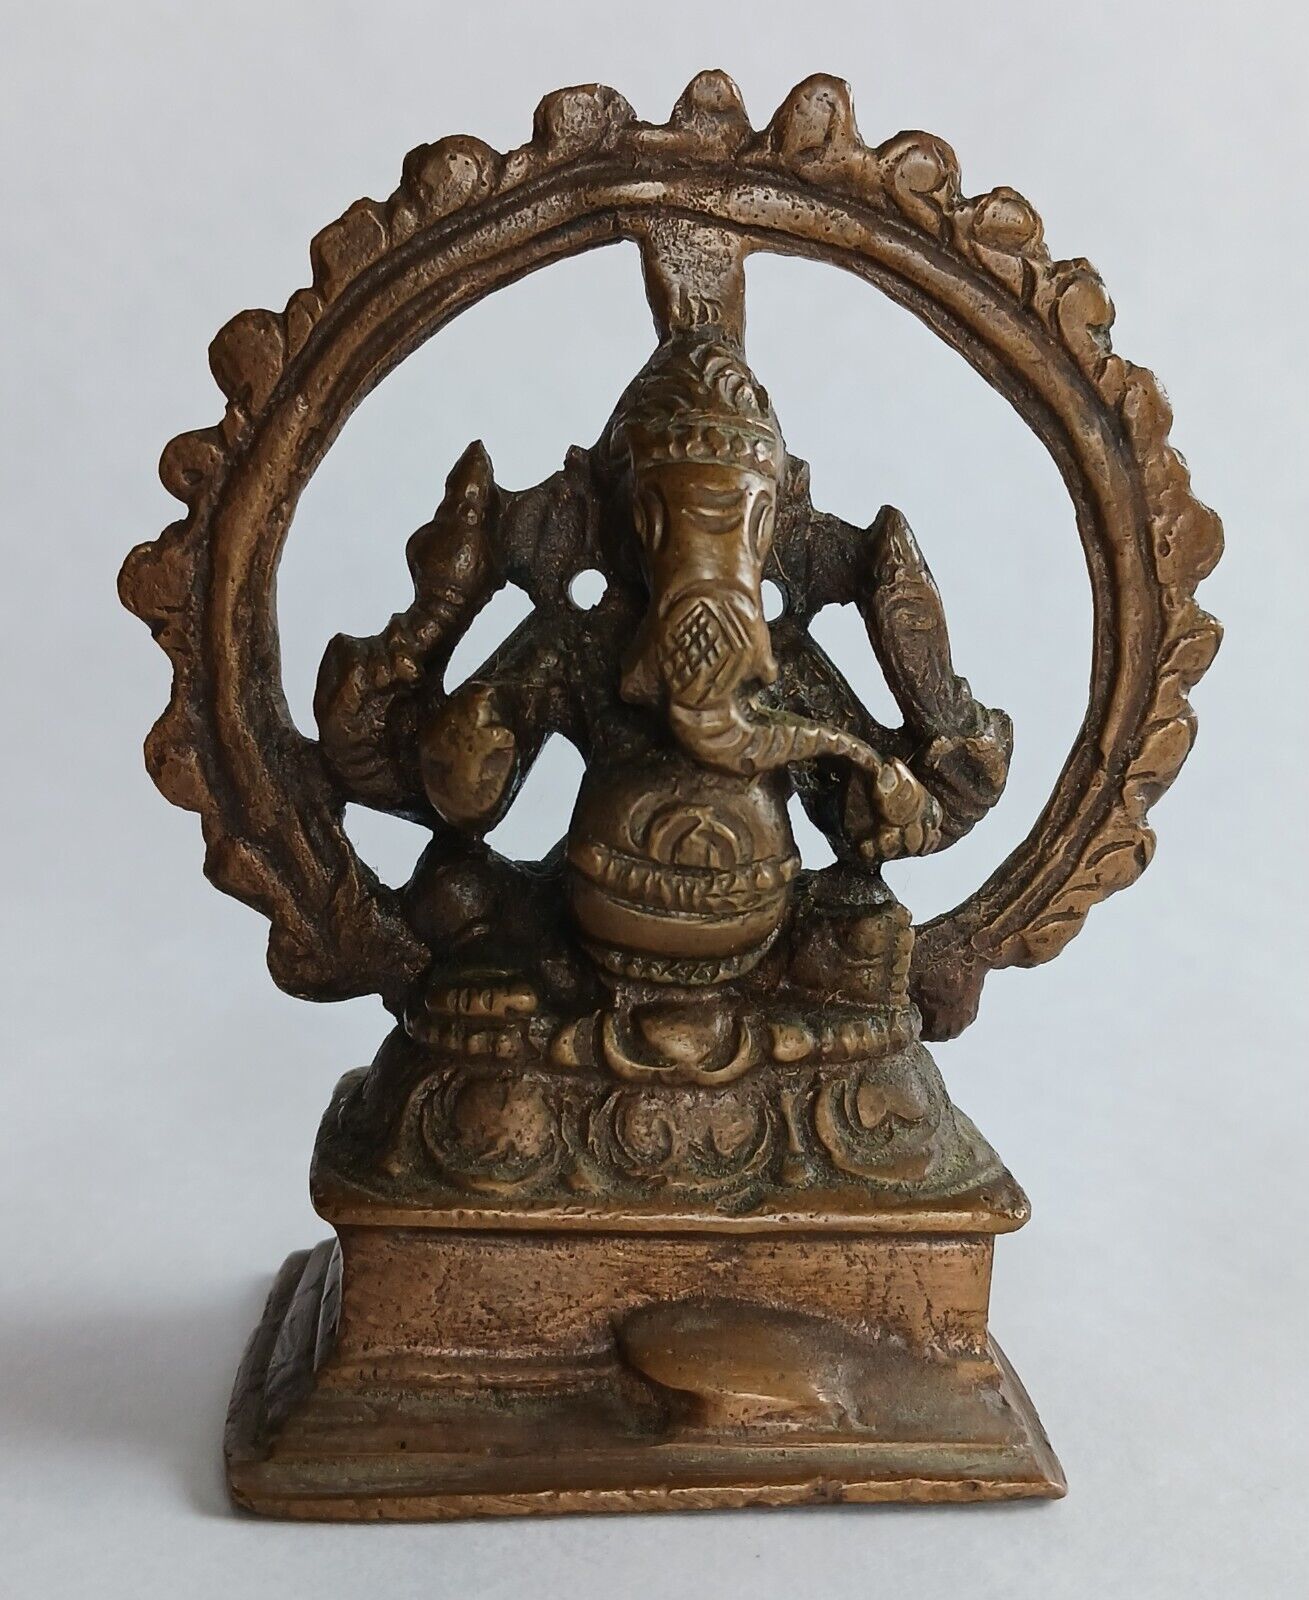 Vintage Small Solid Brass Ganesha Statue Figurine Sitting On Alter Collectable